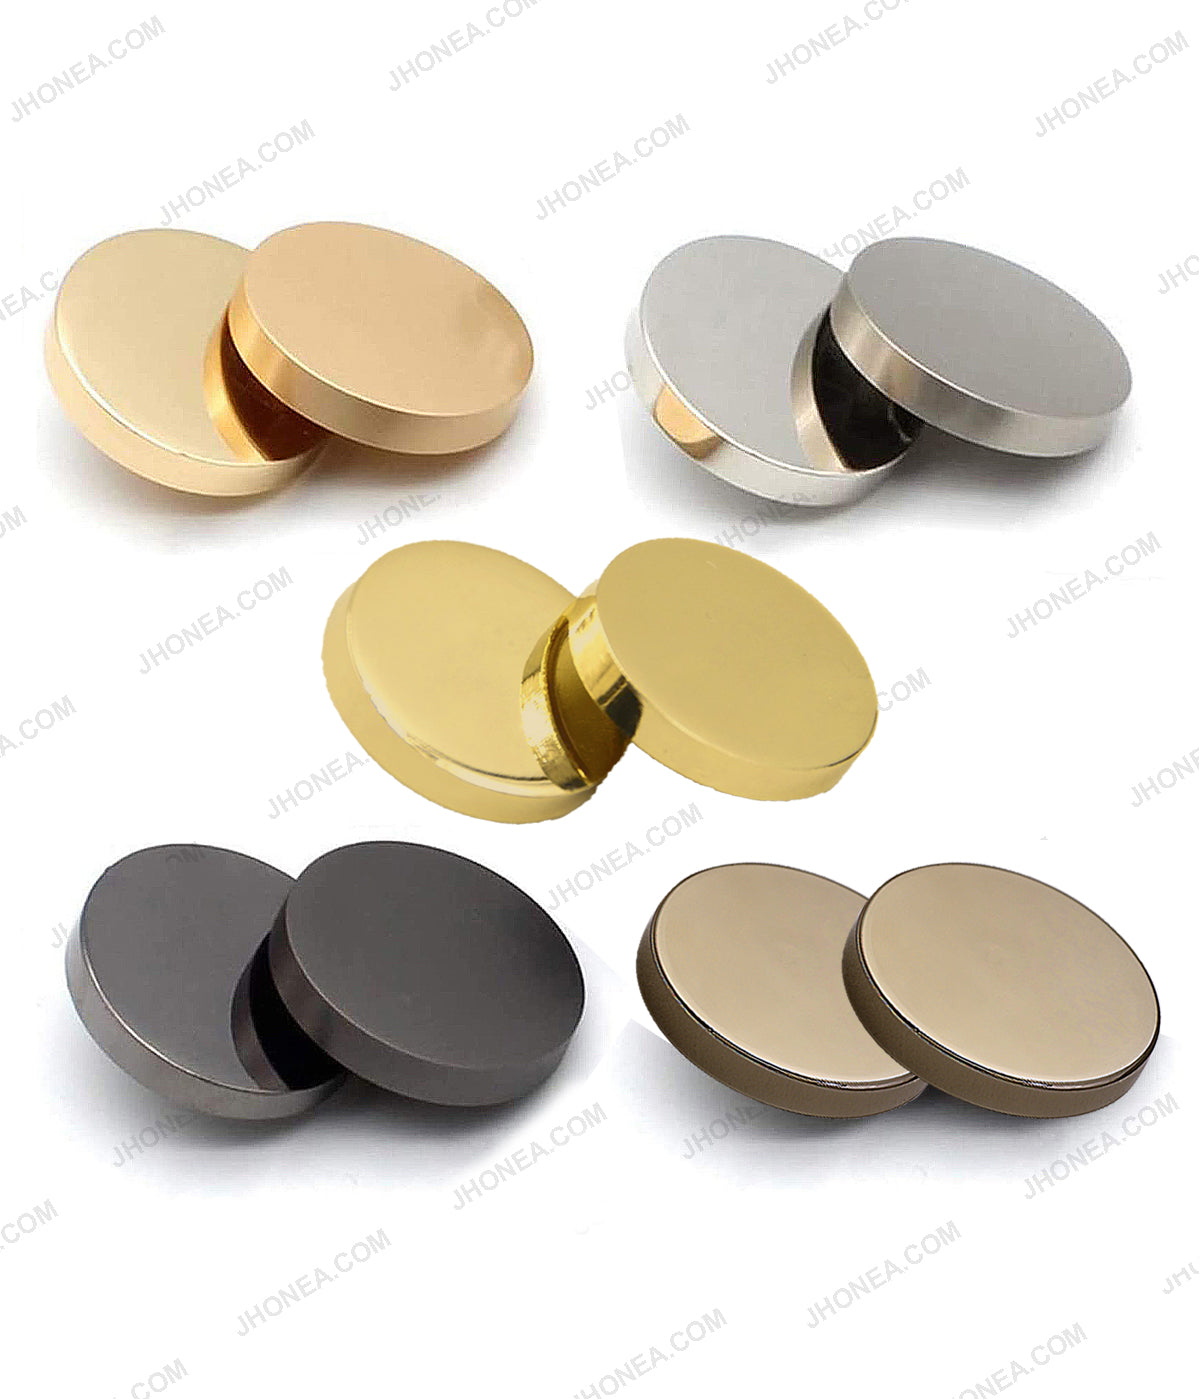 Buy Silver Metal Buttons Online in Wholesale on Jhonea – JHONEA